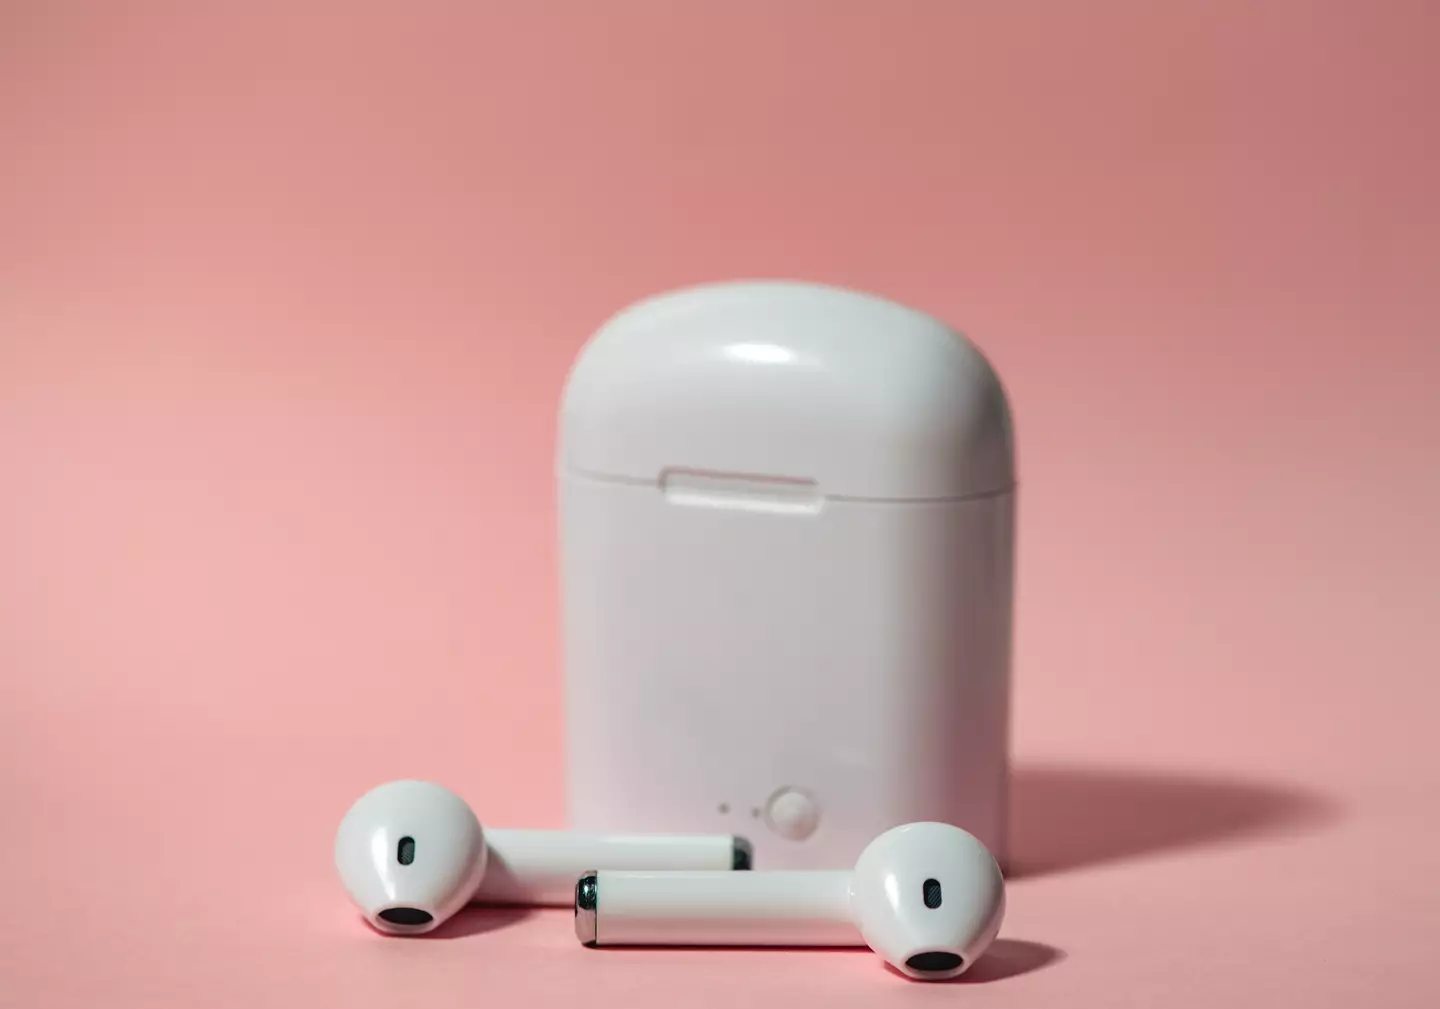 'When placing your AirPods inside, it’s possible that one may not make full contact with the charging pins,' the video explained.